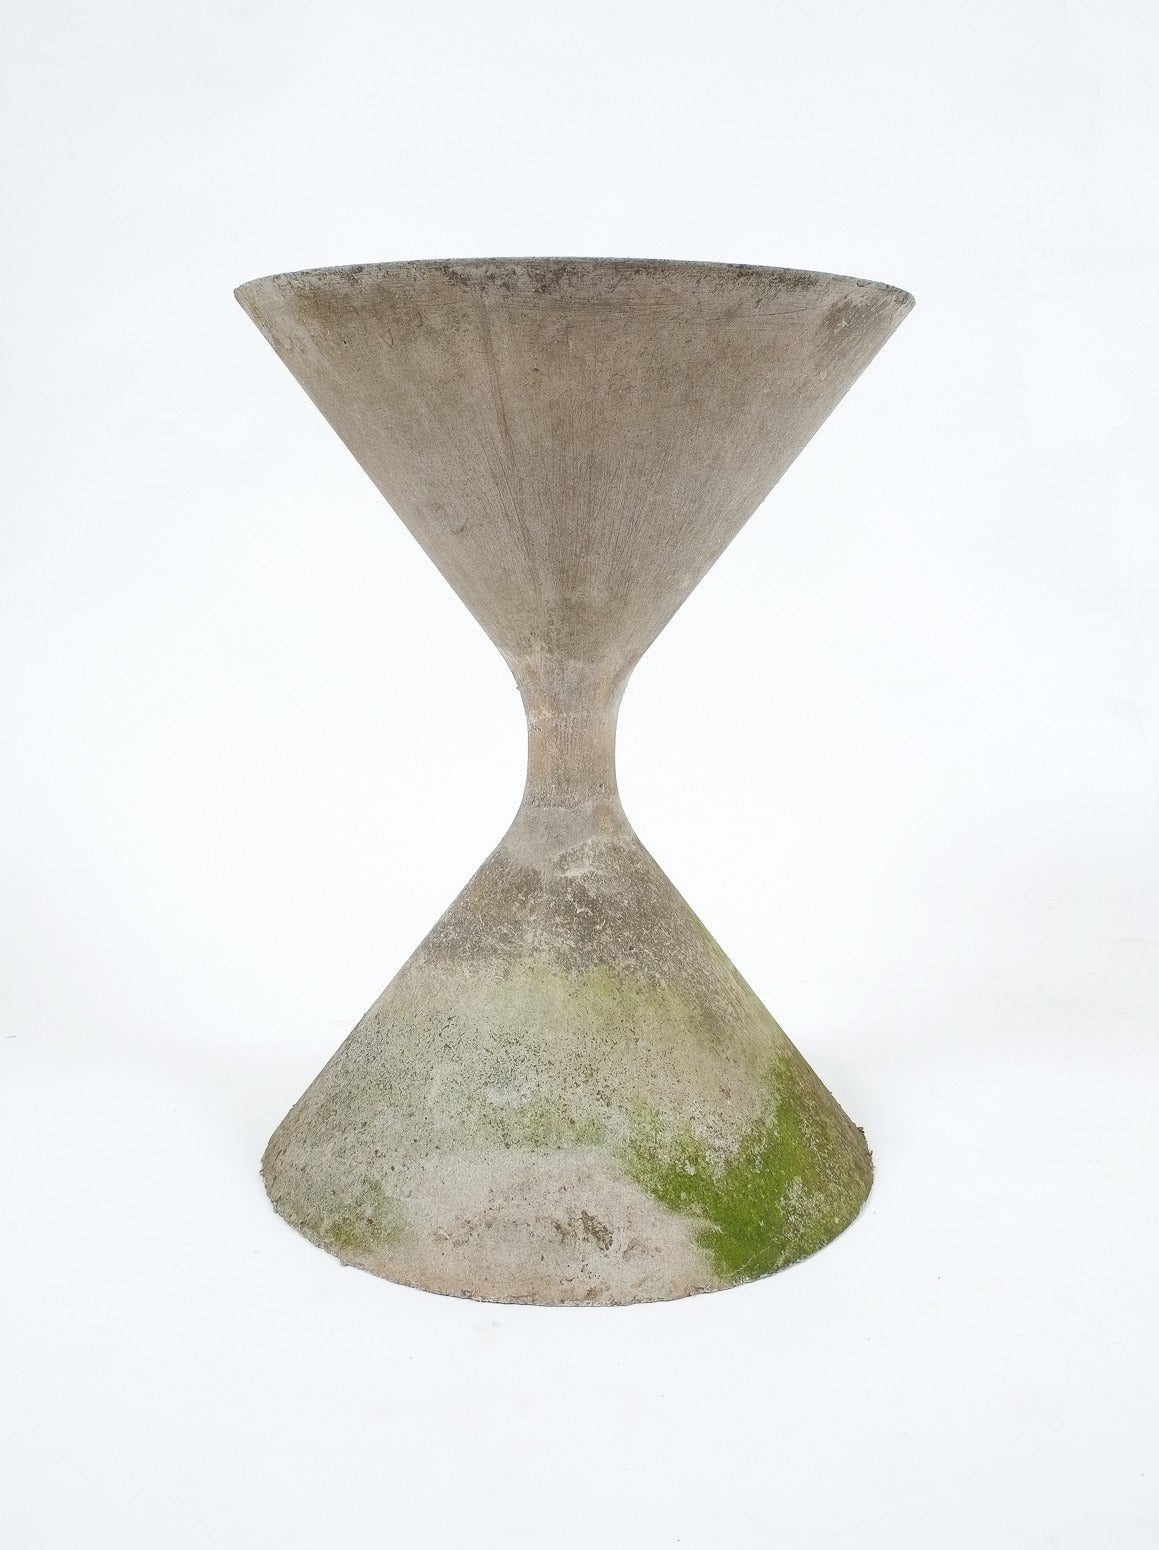 Beautiful Willy Guhl hourglass concrete planter with great original patina.
Condition is good, no cracks.

Shipping is complimentary.